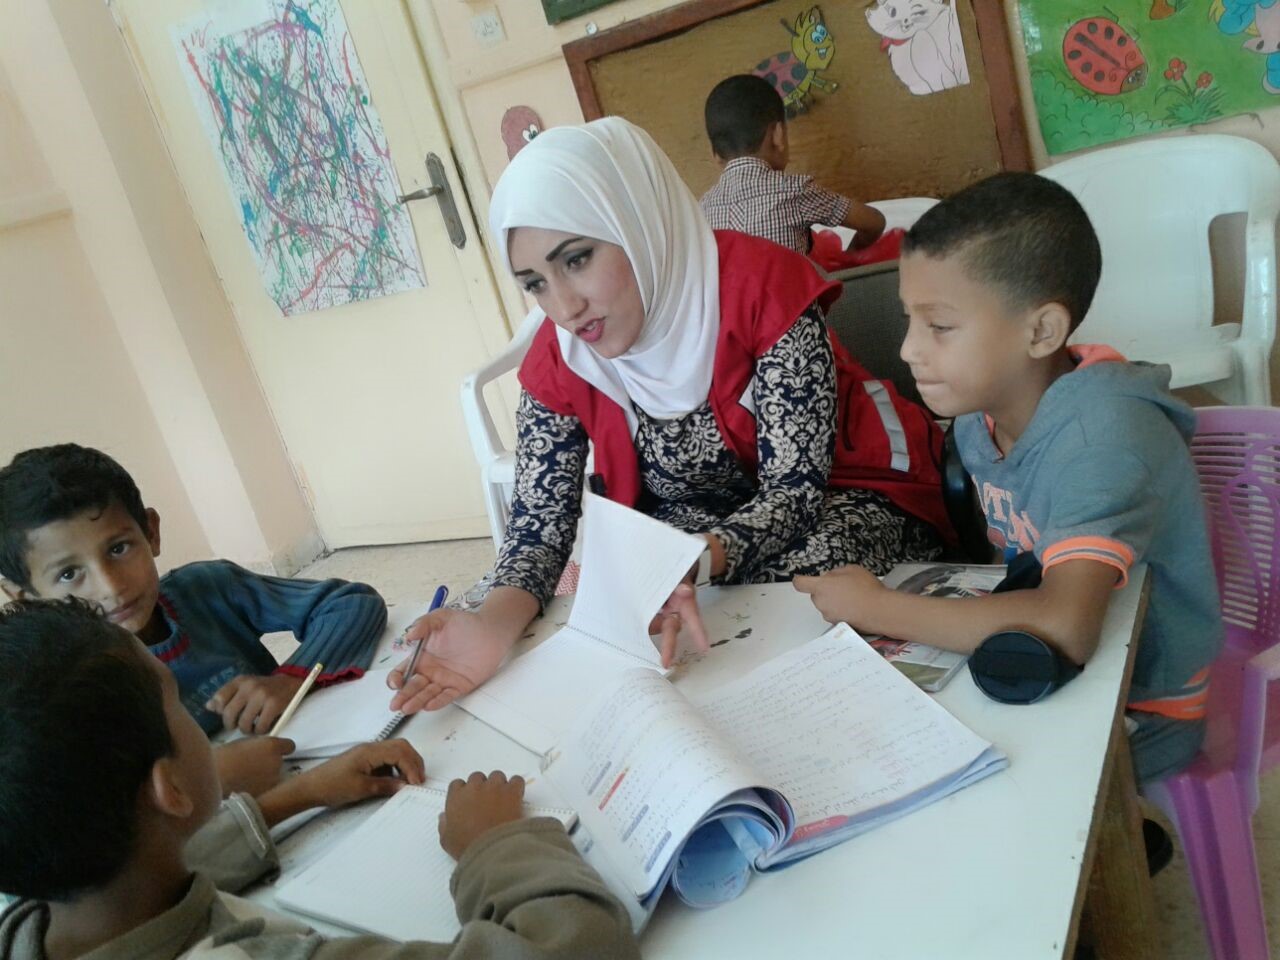 Dina volunteering with the Jordan National Red Crescent Society to help children with their homework